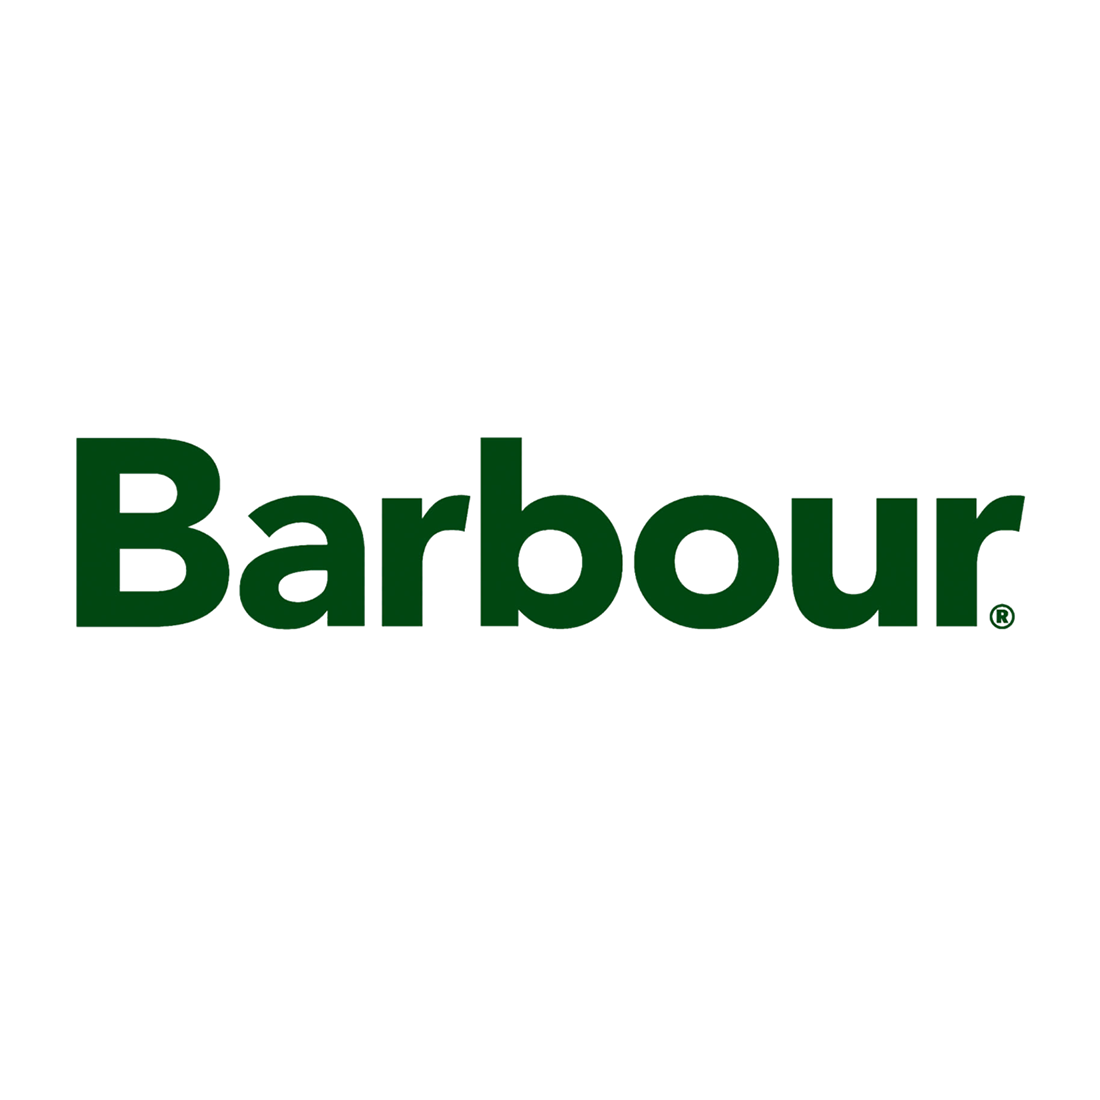 barbour company